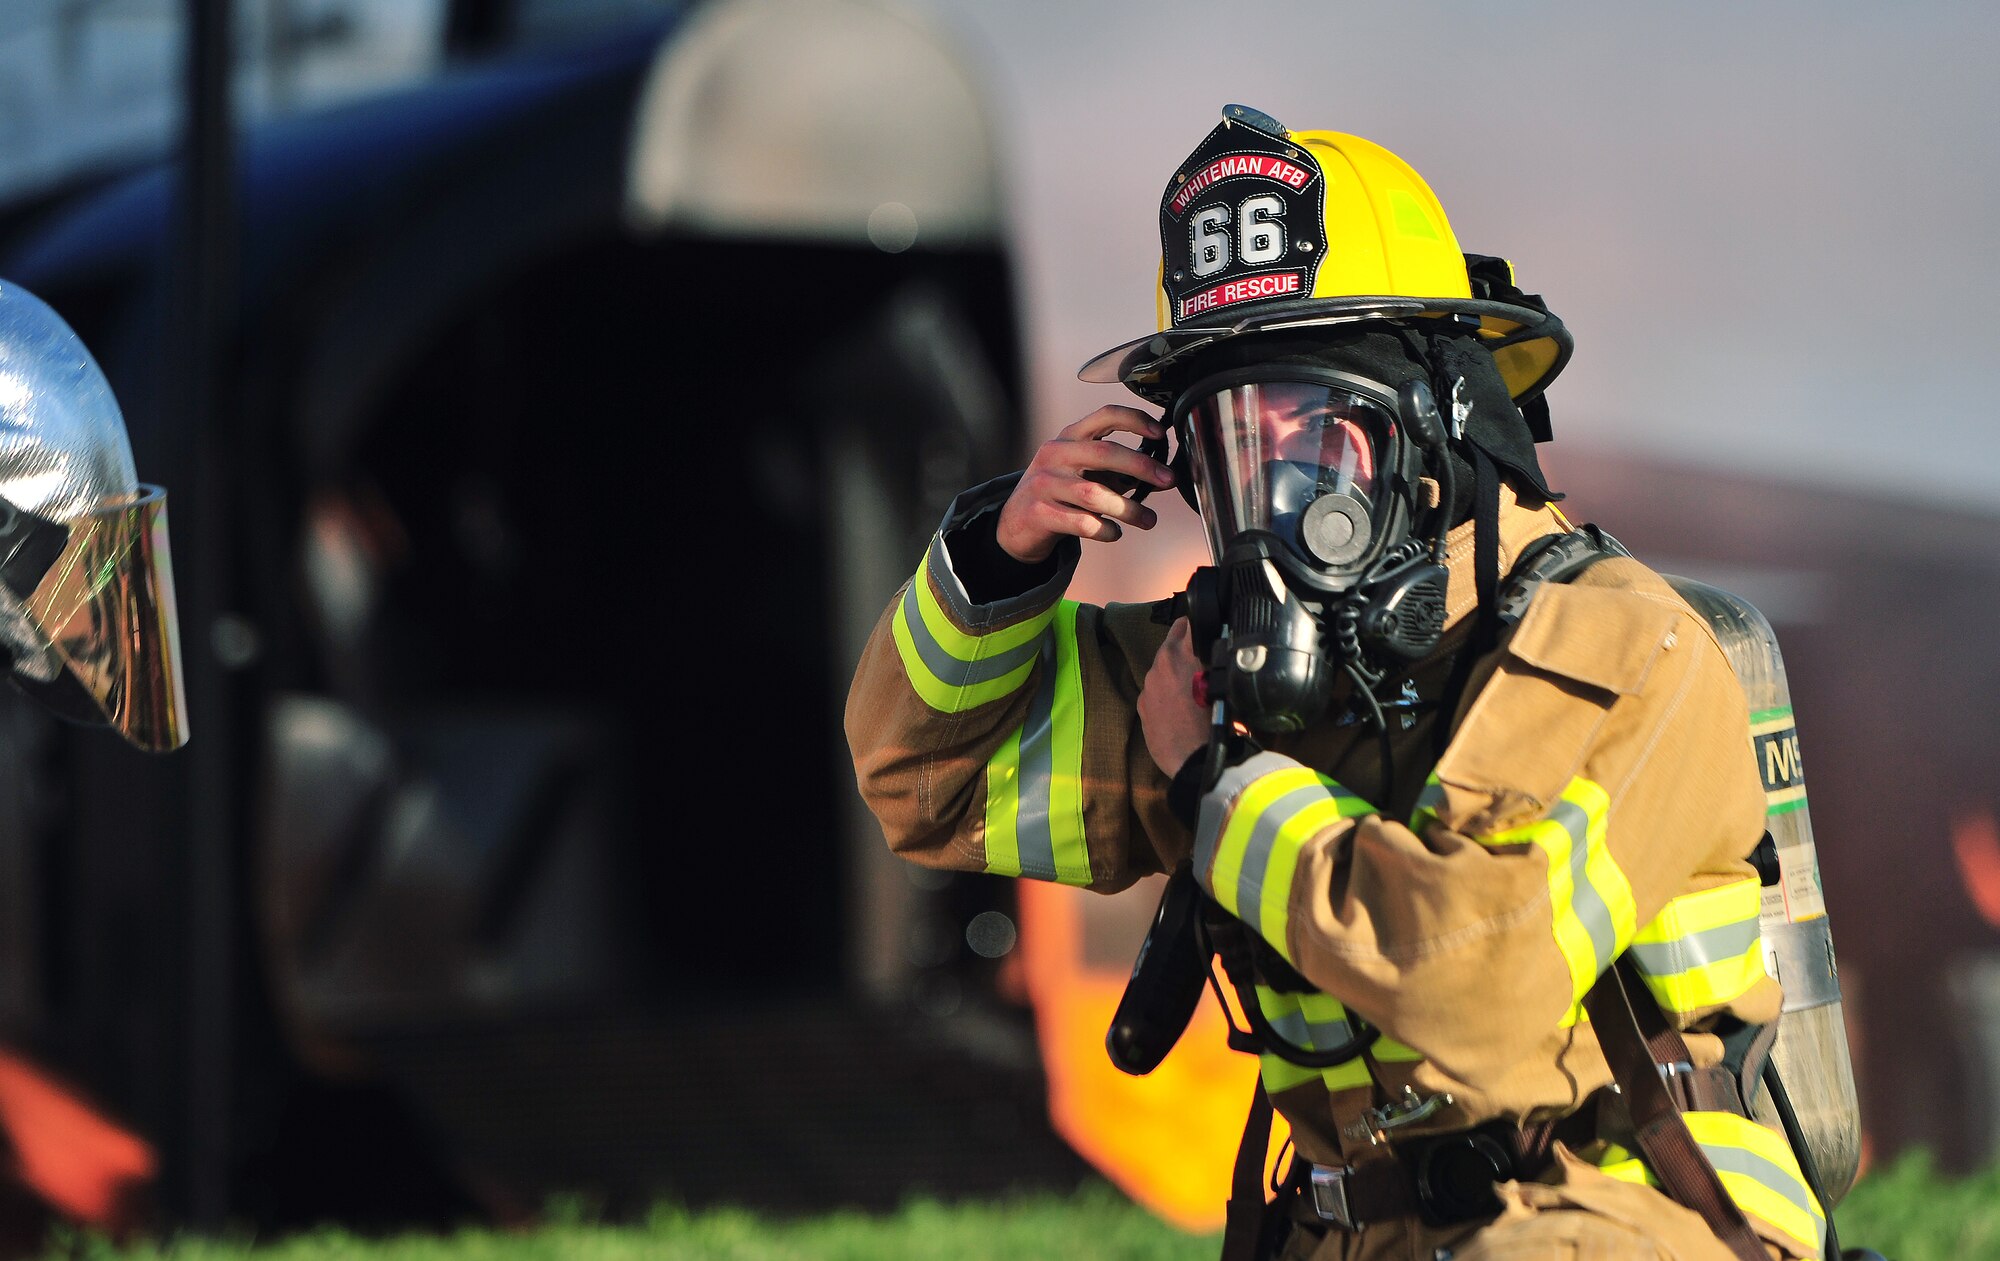 A firefighter from the 509th Civil Engineer Squadron makes adjustments to his gear prior to engaging with a simulated aircraft fire during a major accident response exercise (MARE) at Whiteman Air Force Base, Mo., June 8, 2016. The exercise is conducted to test readiness and response times in case of a major accident.  (US Air Force photo by Senior Airman Jovan Banks)